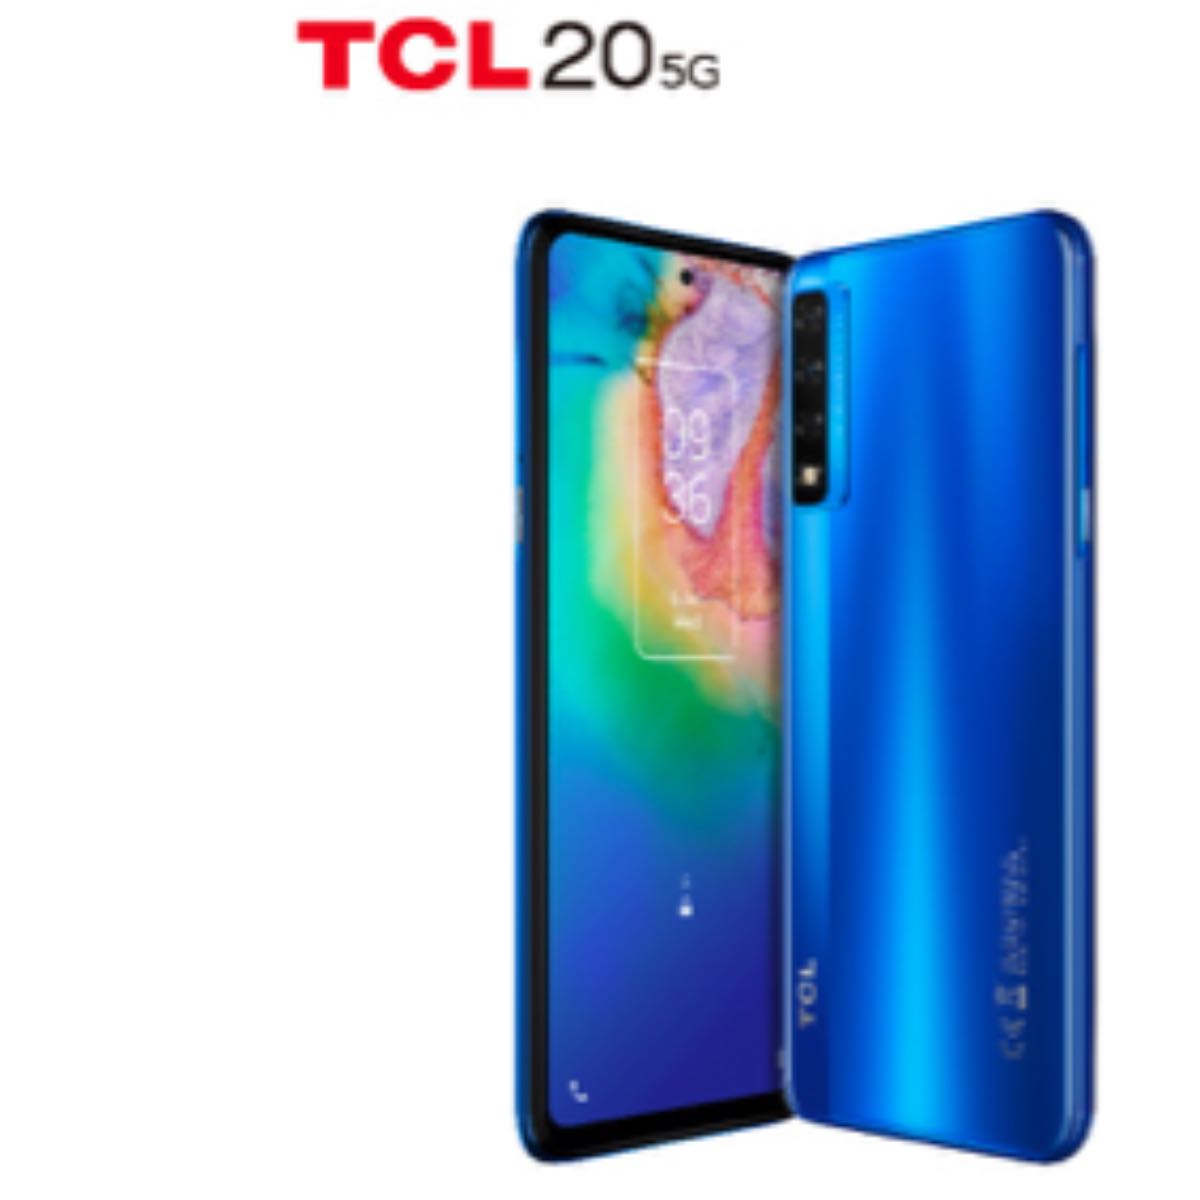 tcl 20 5g 2